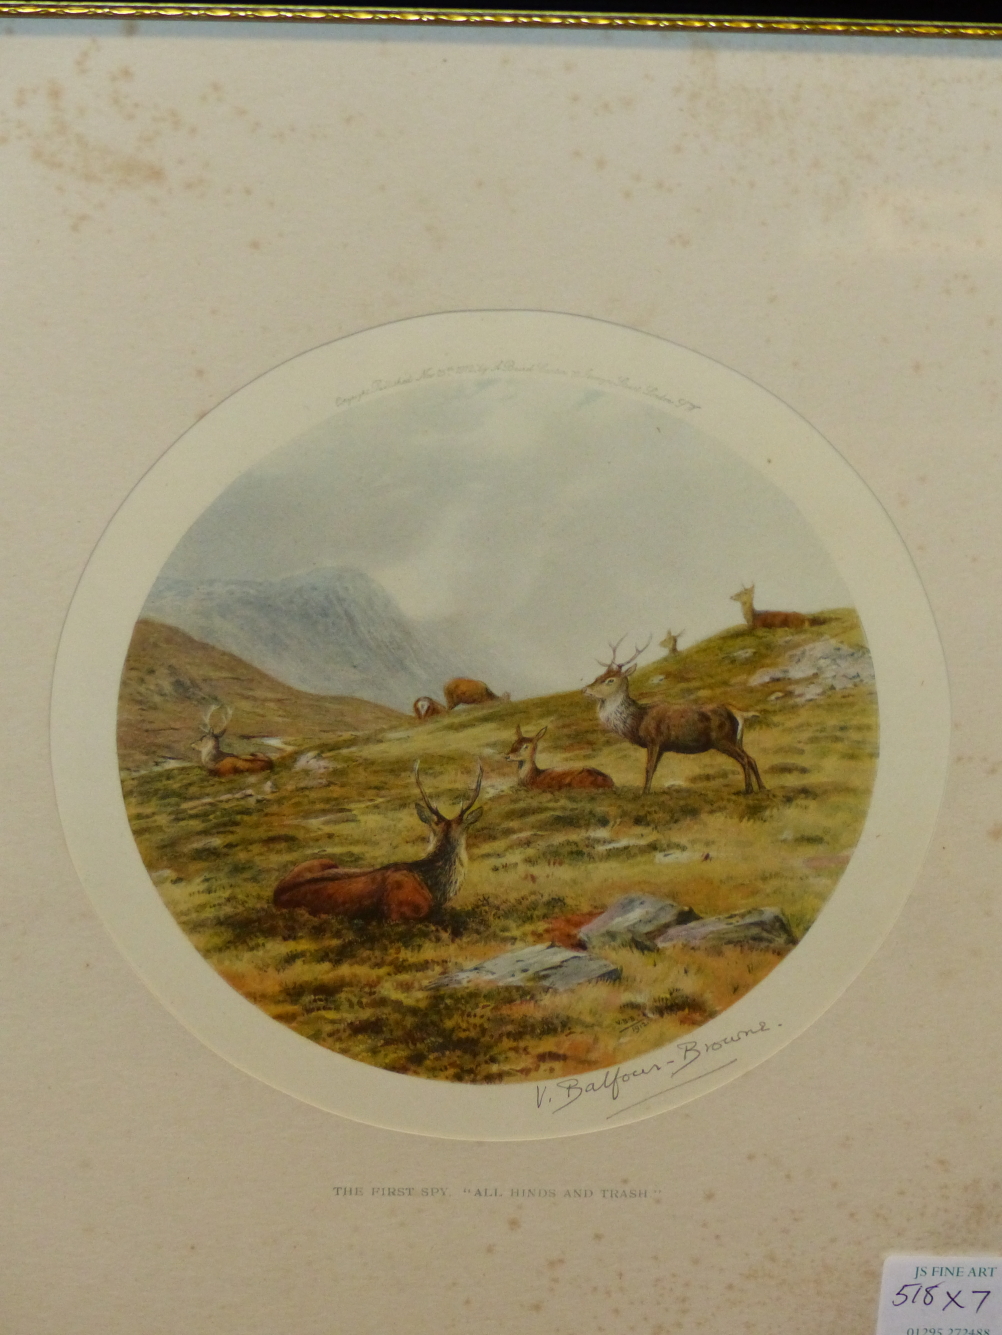 AFTER V.BALFOUR-BROWNIE. (1880-1963) SEVEN COLOUR PRINTS OF DEER IN THE HIGHLANDS, EACH PENCIL - Image 6 of 8